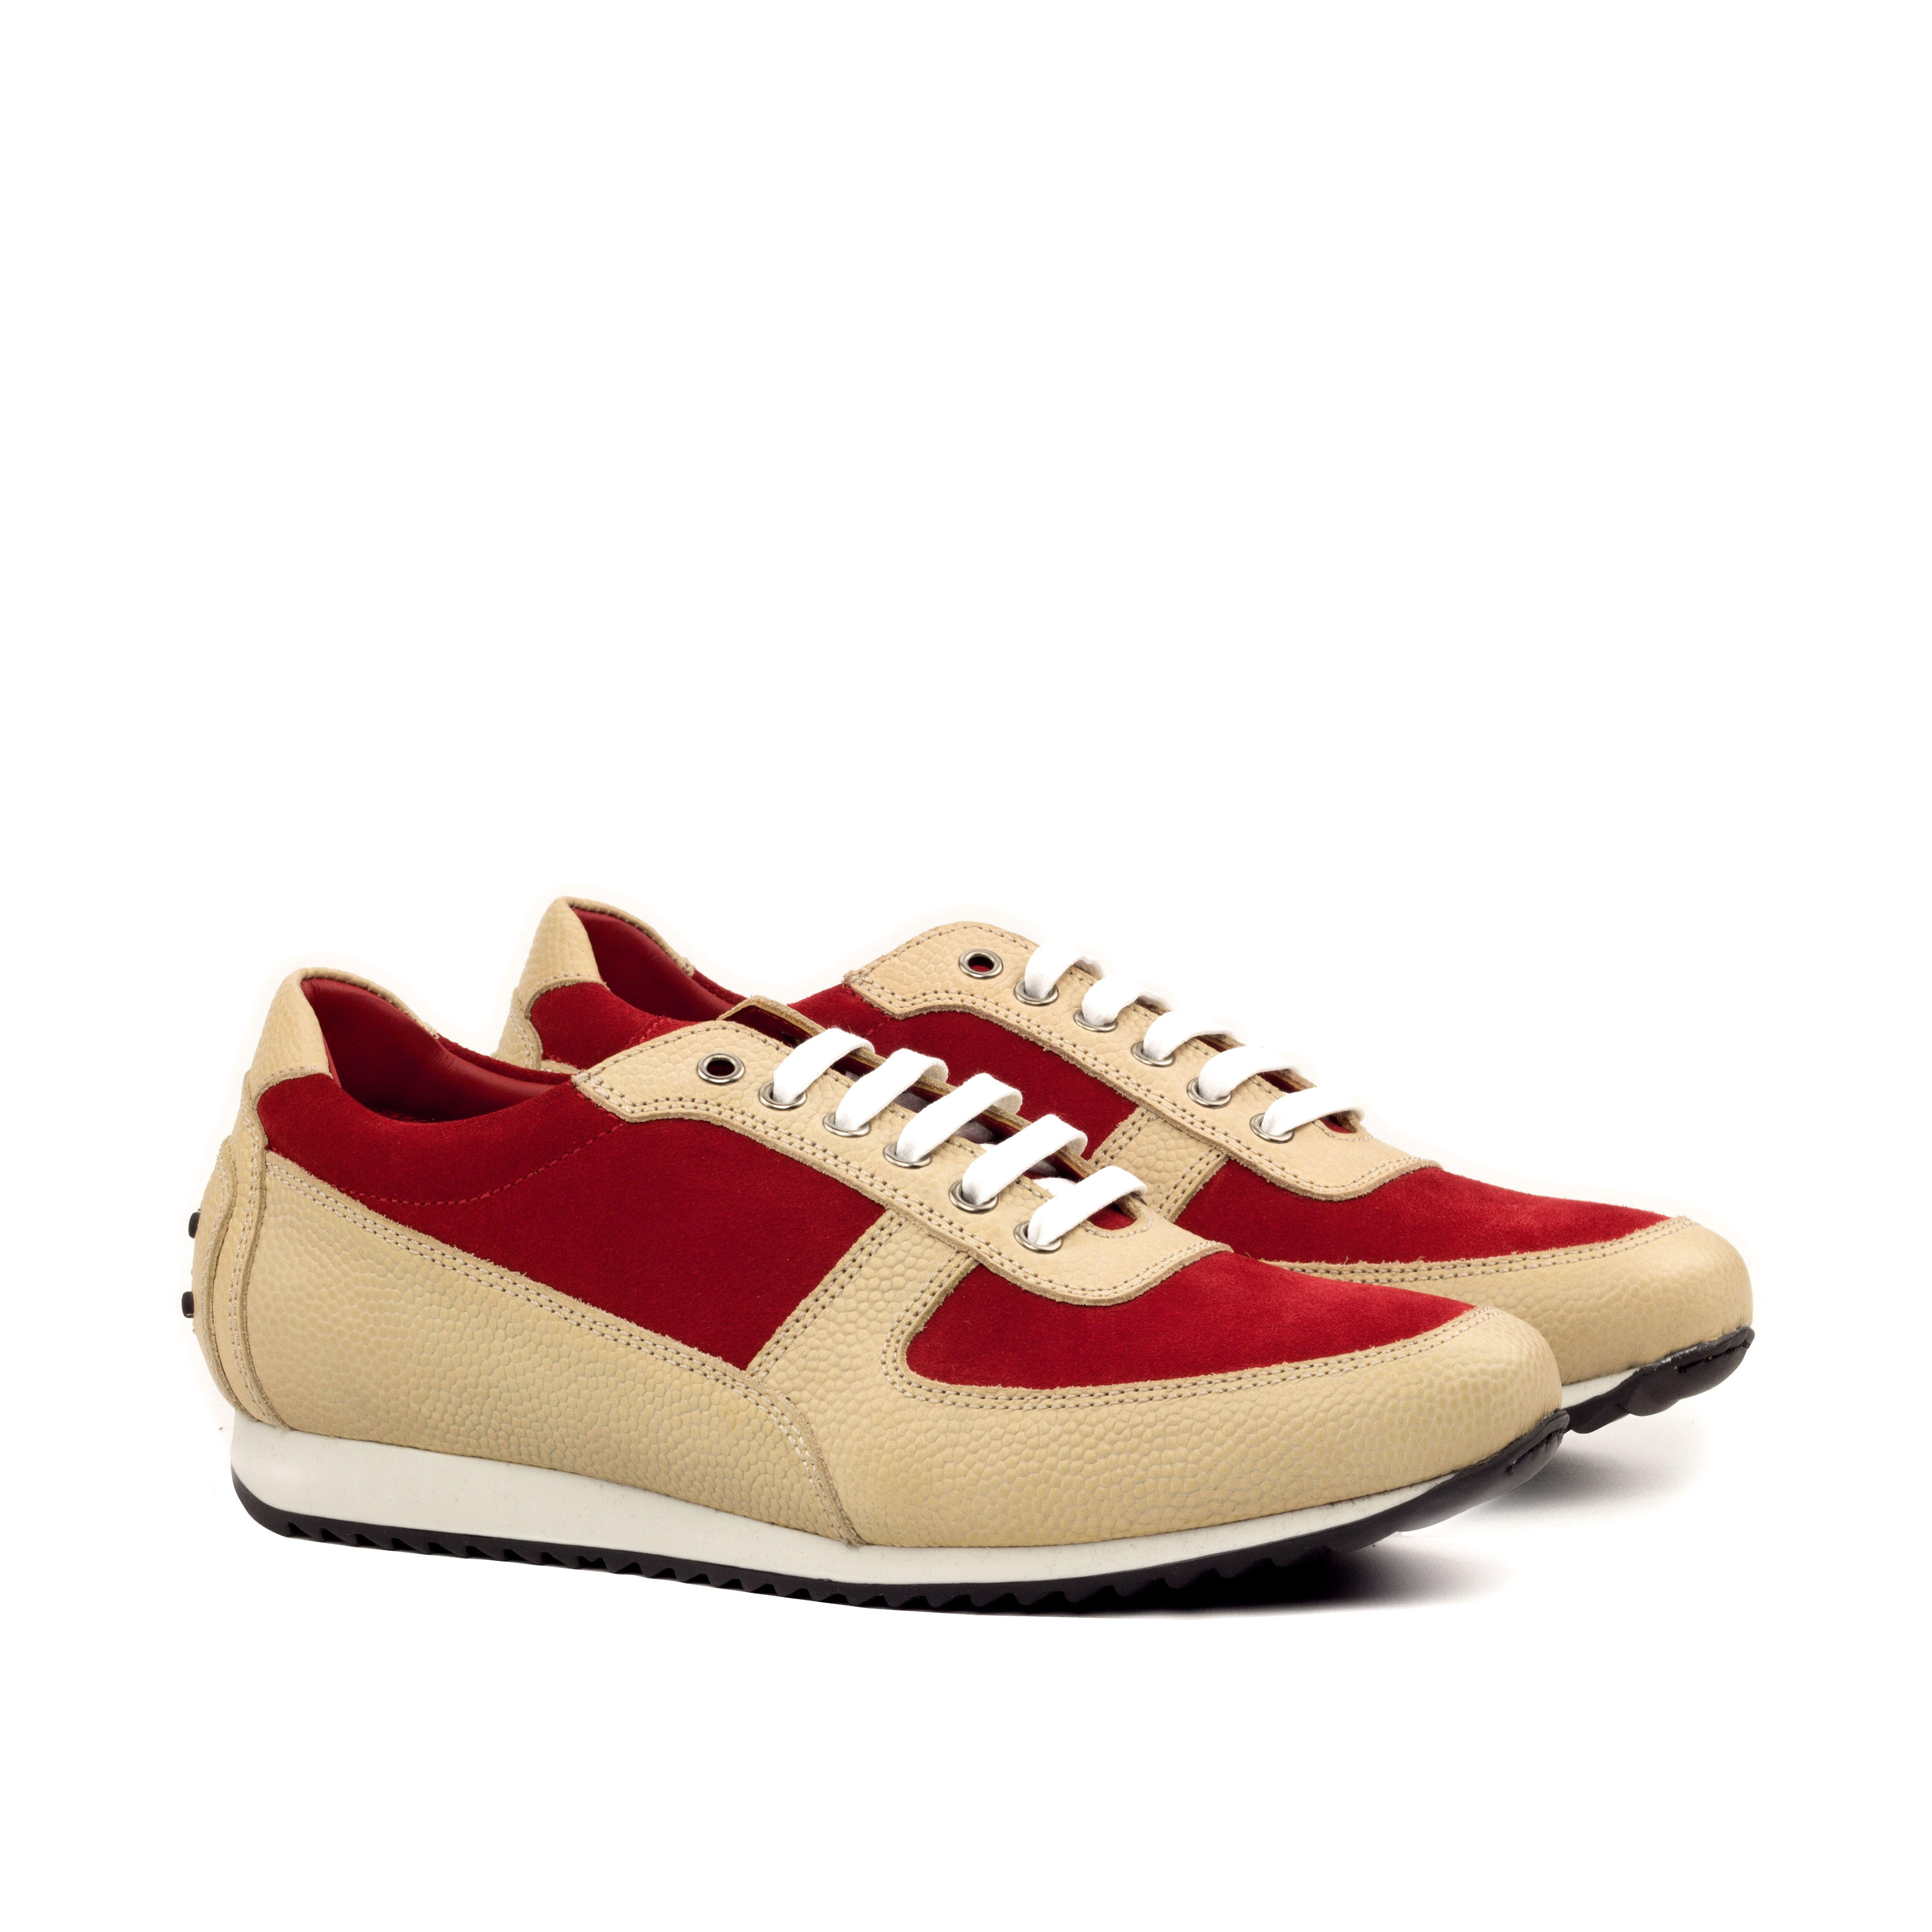 MANOR OF LONDON 'The Runner' Fawn Pebble Grain & Red Suede Trainer Luxury Custom Initials Monogrammed Front Side View